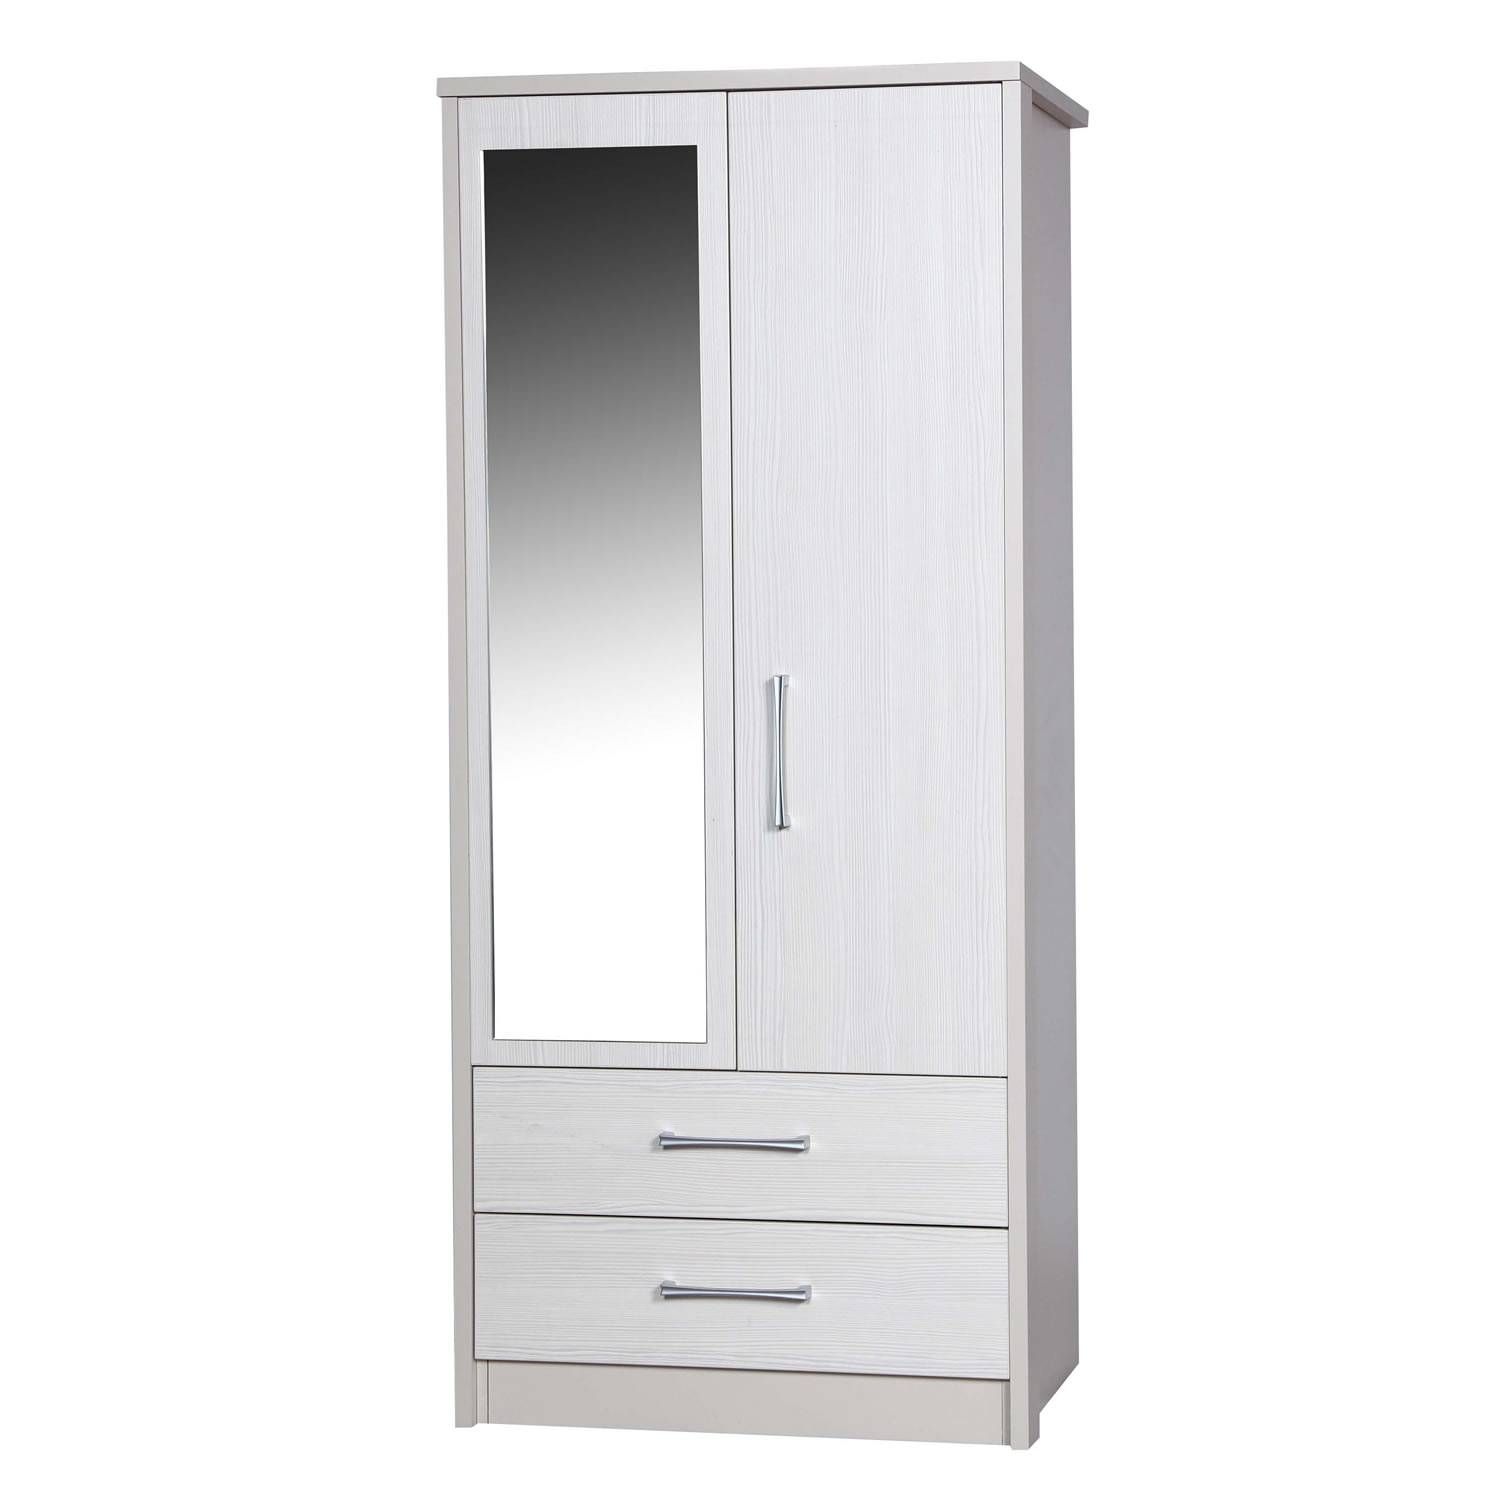 Avola White 2 Door 2 Drawer Combi Wardrobe With Mirror – Next Day Pertaining To 4 Door Wardrobes With Mirror And Drawers (View 14 of 15)